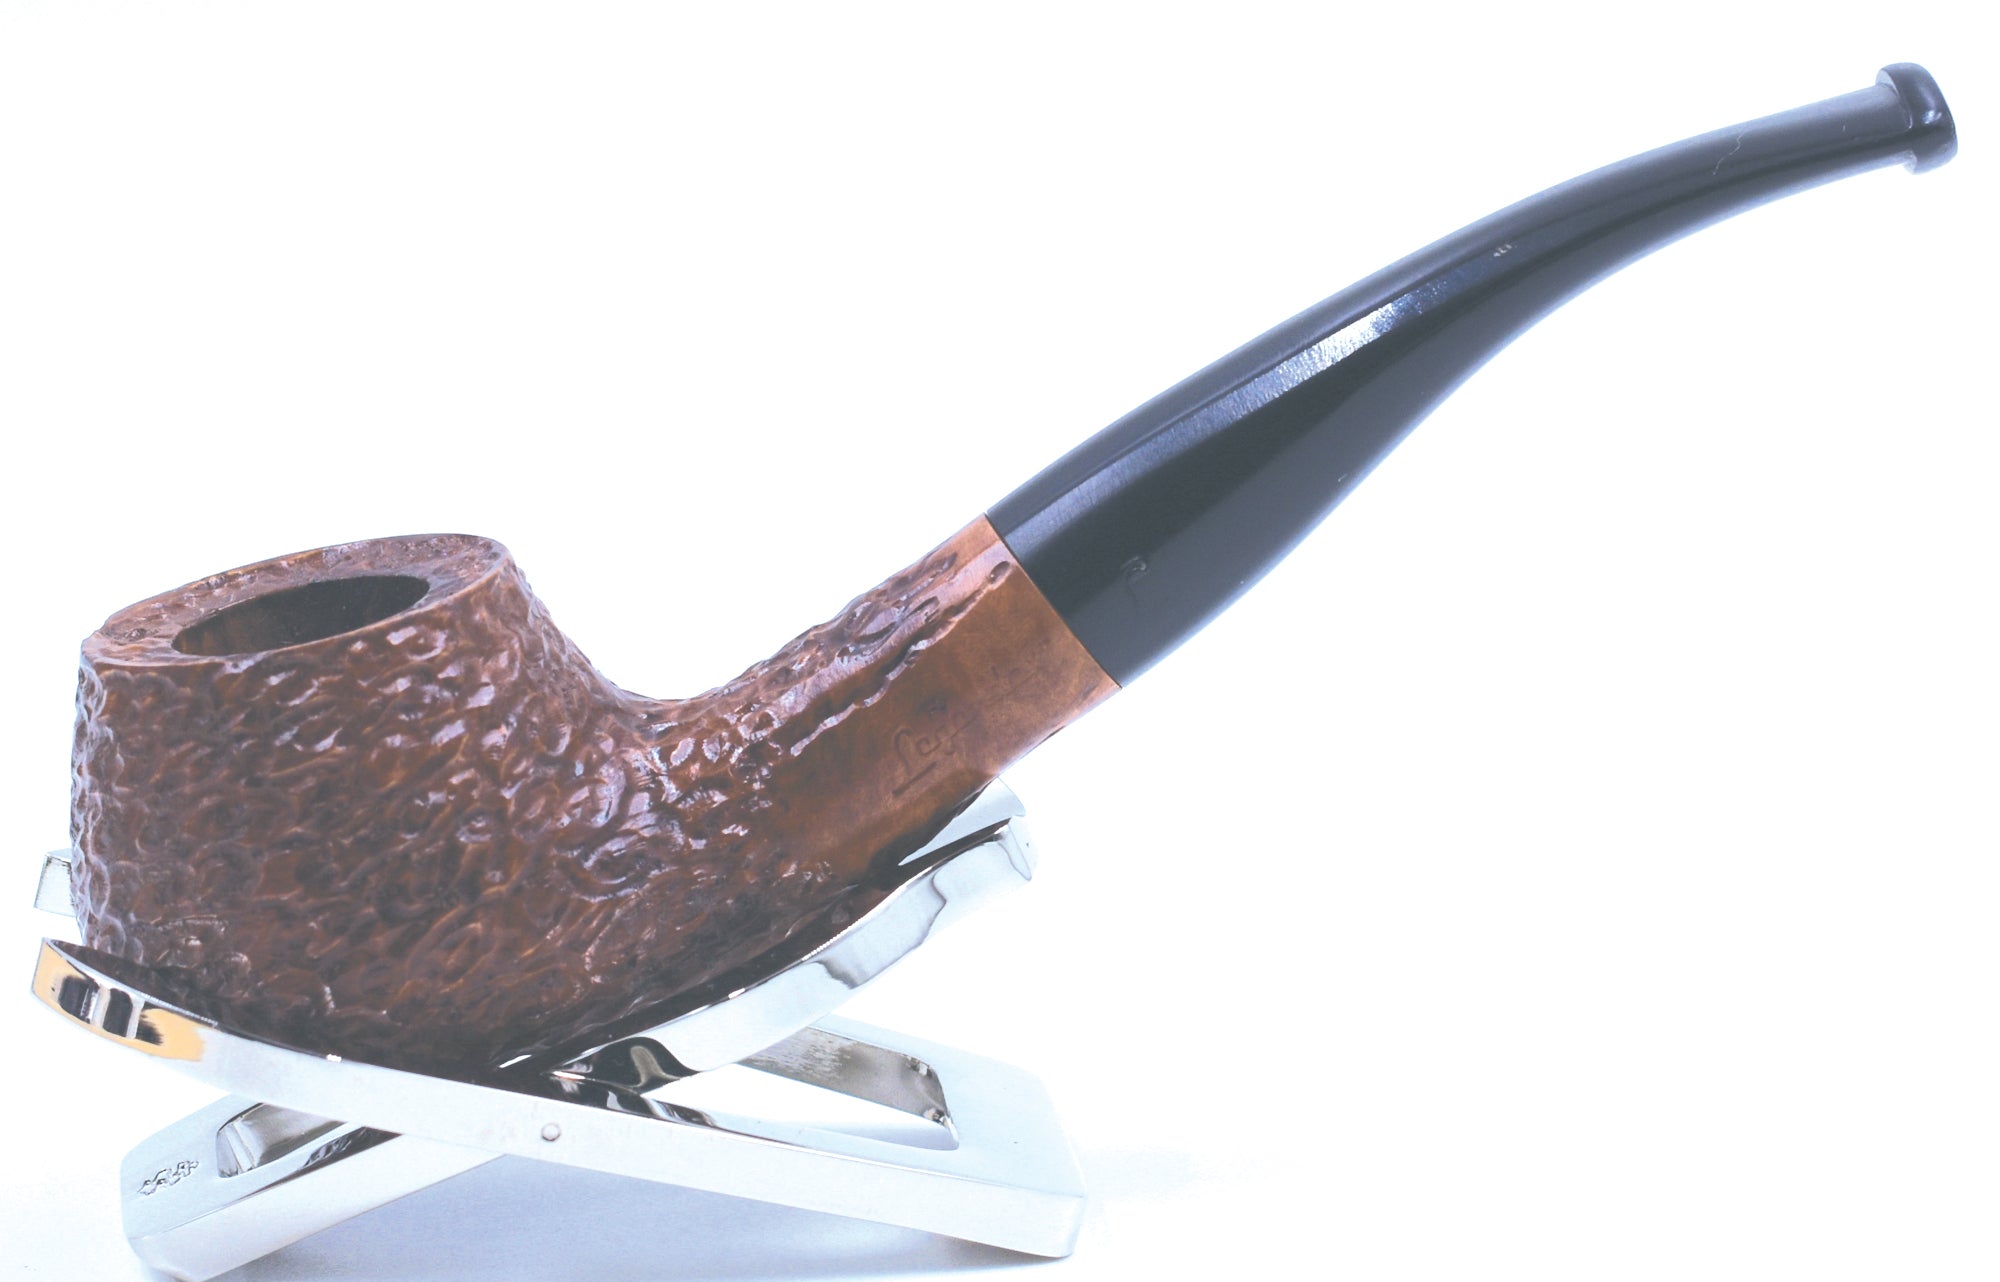 LEGENDEX® PUCCINI* 6 MM Filtered Briar Smoking Pipe Made In Italy 01-08-213